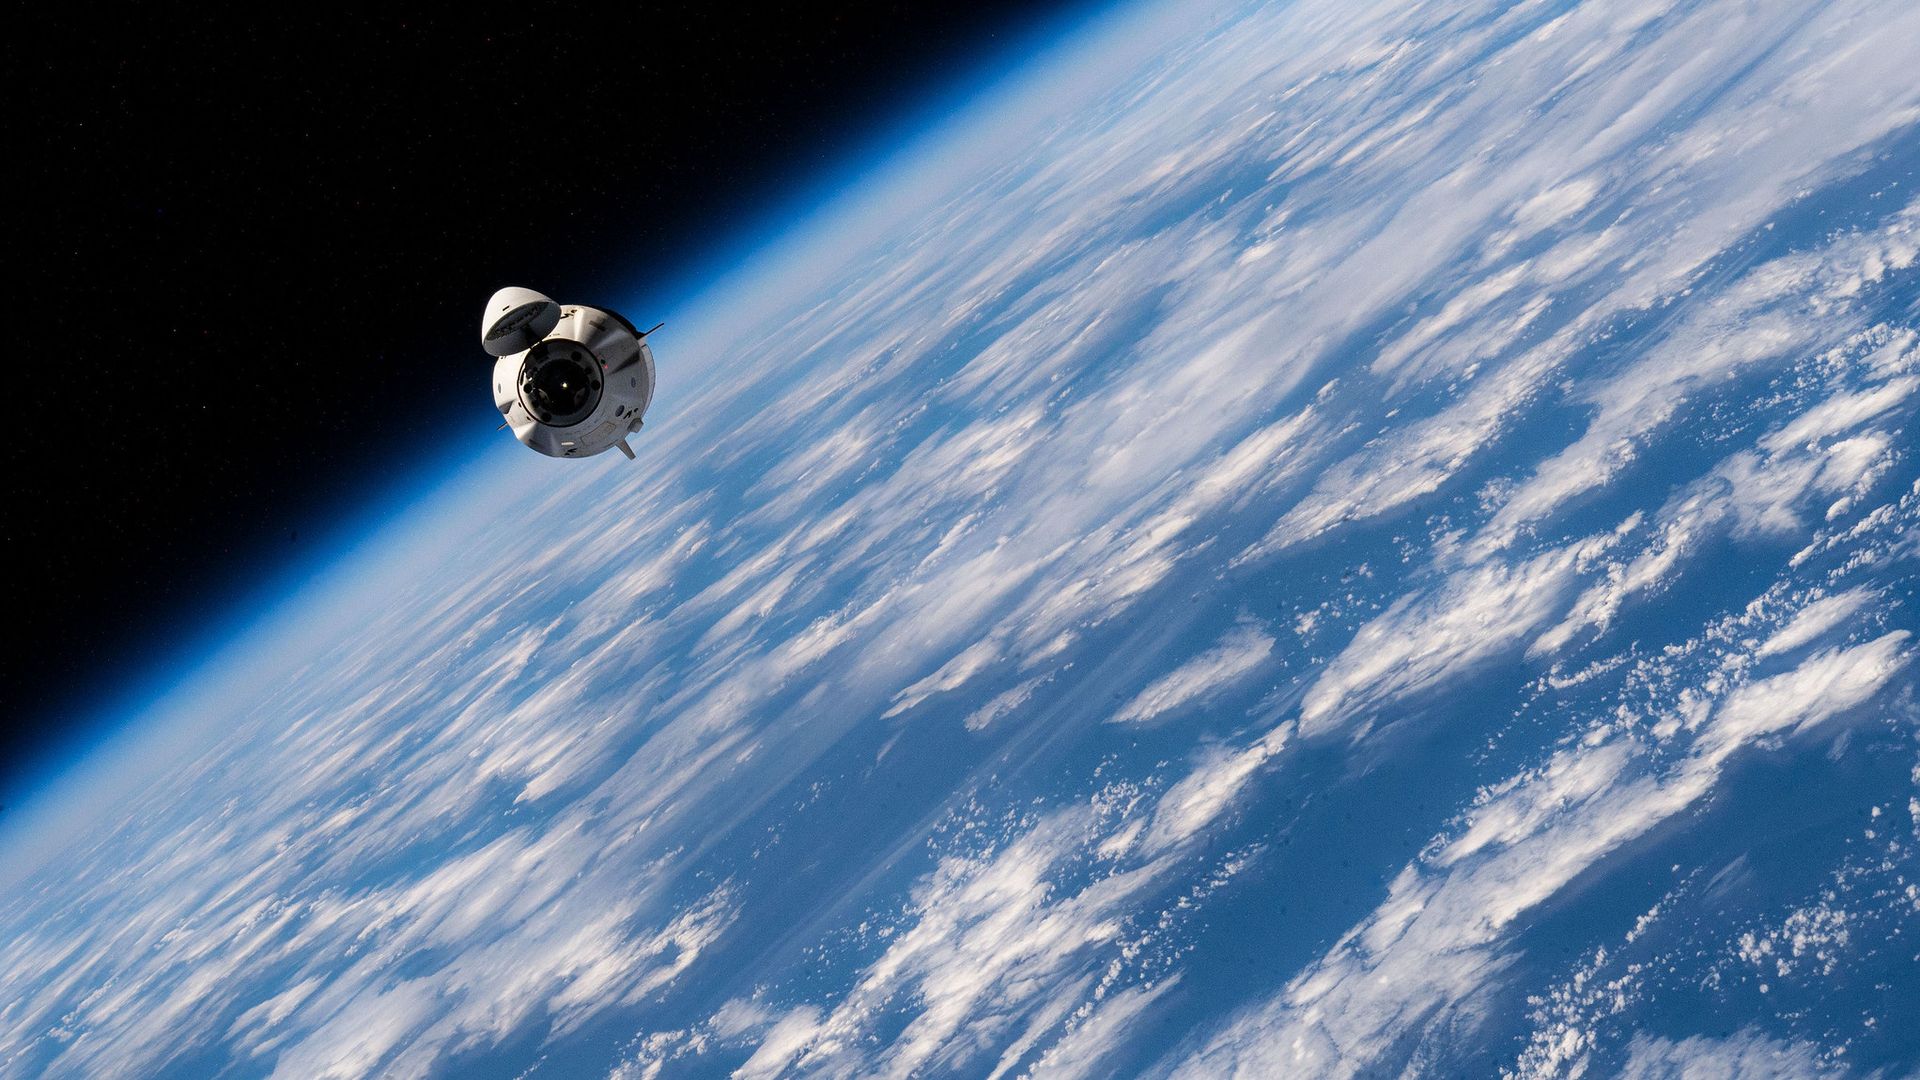 SpaceX Crew Dragon spacecraft above Earth in 2021. Credit: SpaceX